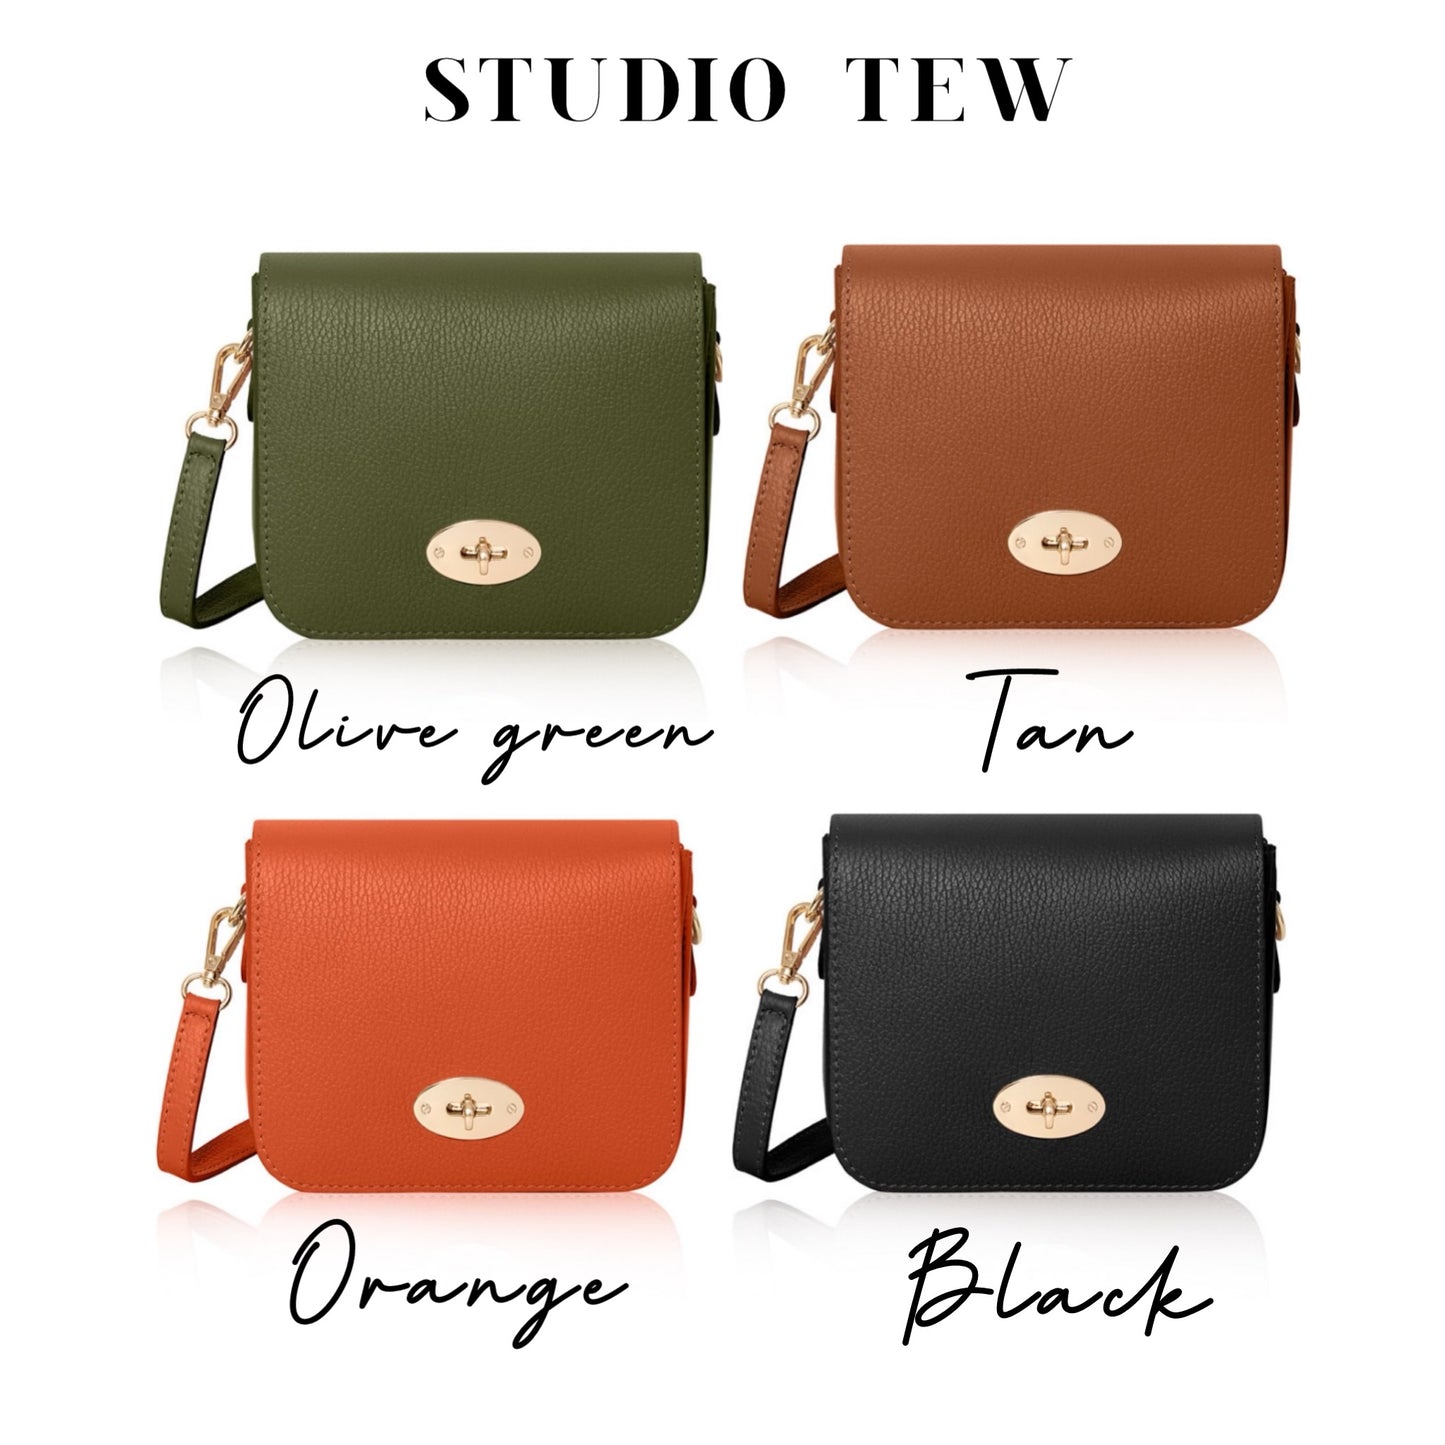 The Cilia Bag - Available in numerous colours.